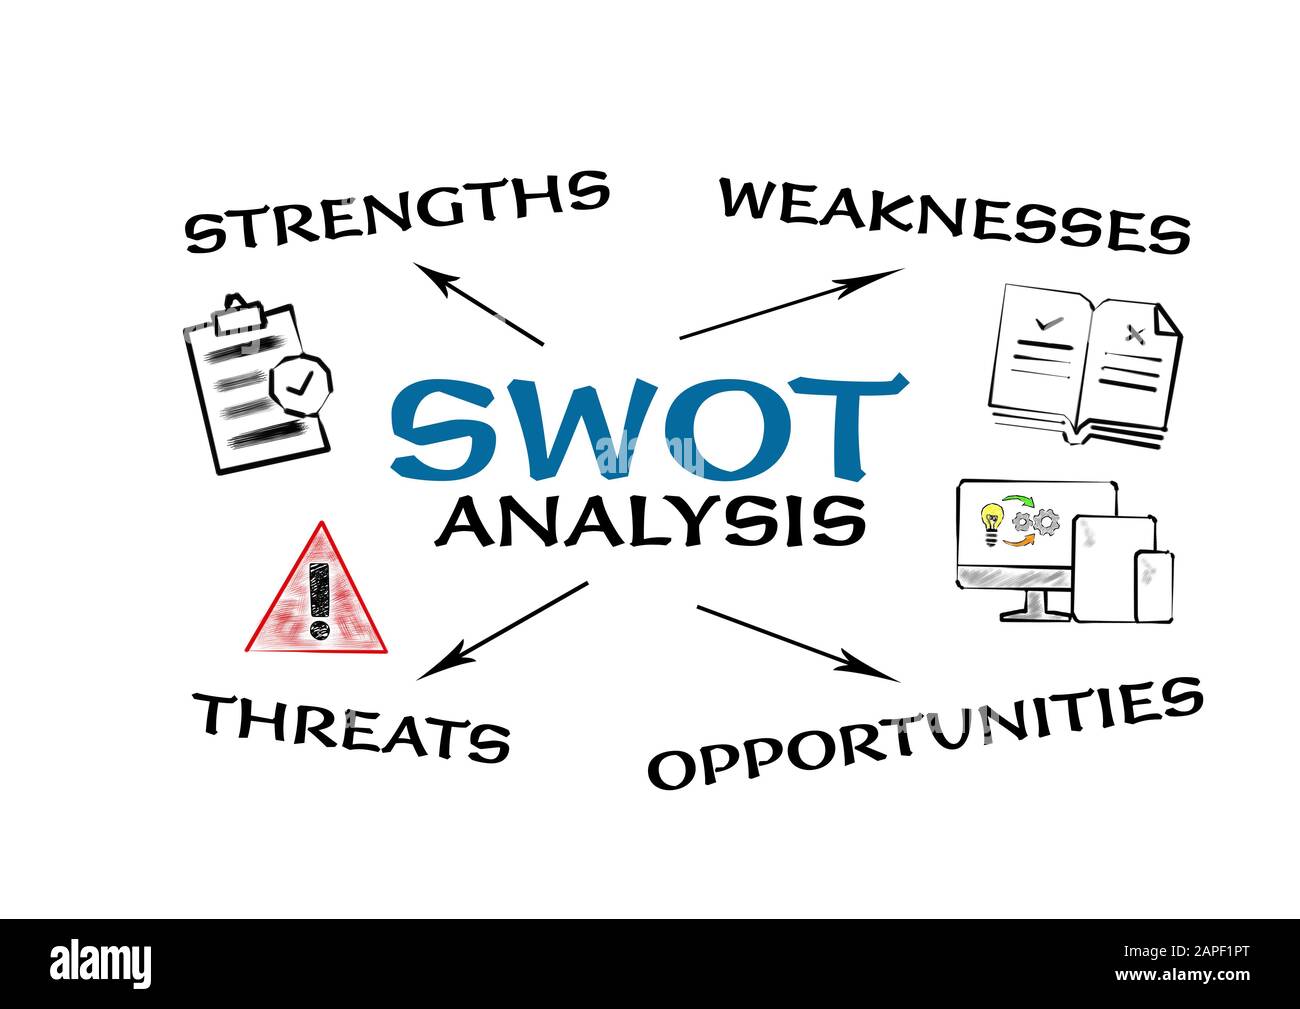 Swot Analysis Strategy Planning Project And Business Concept Chart With Keywords And Icons 0122